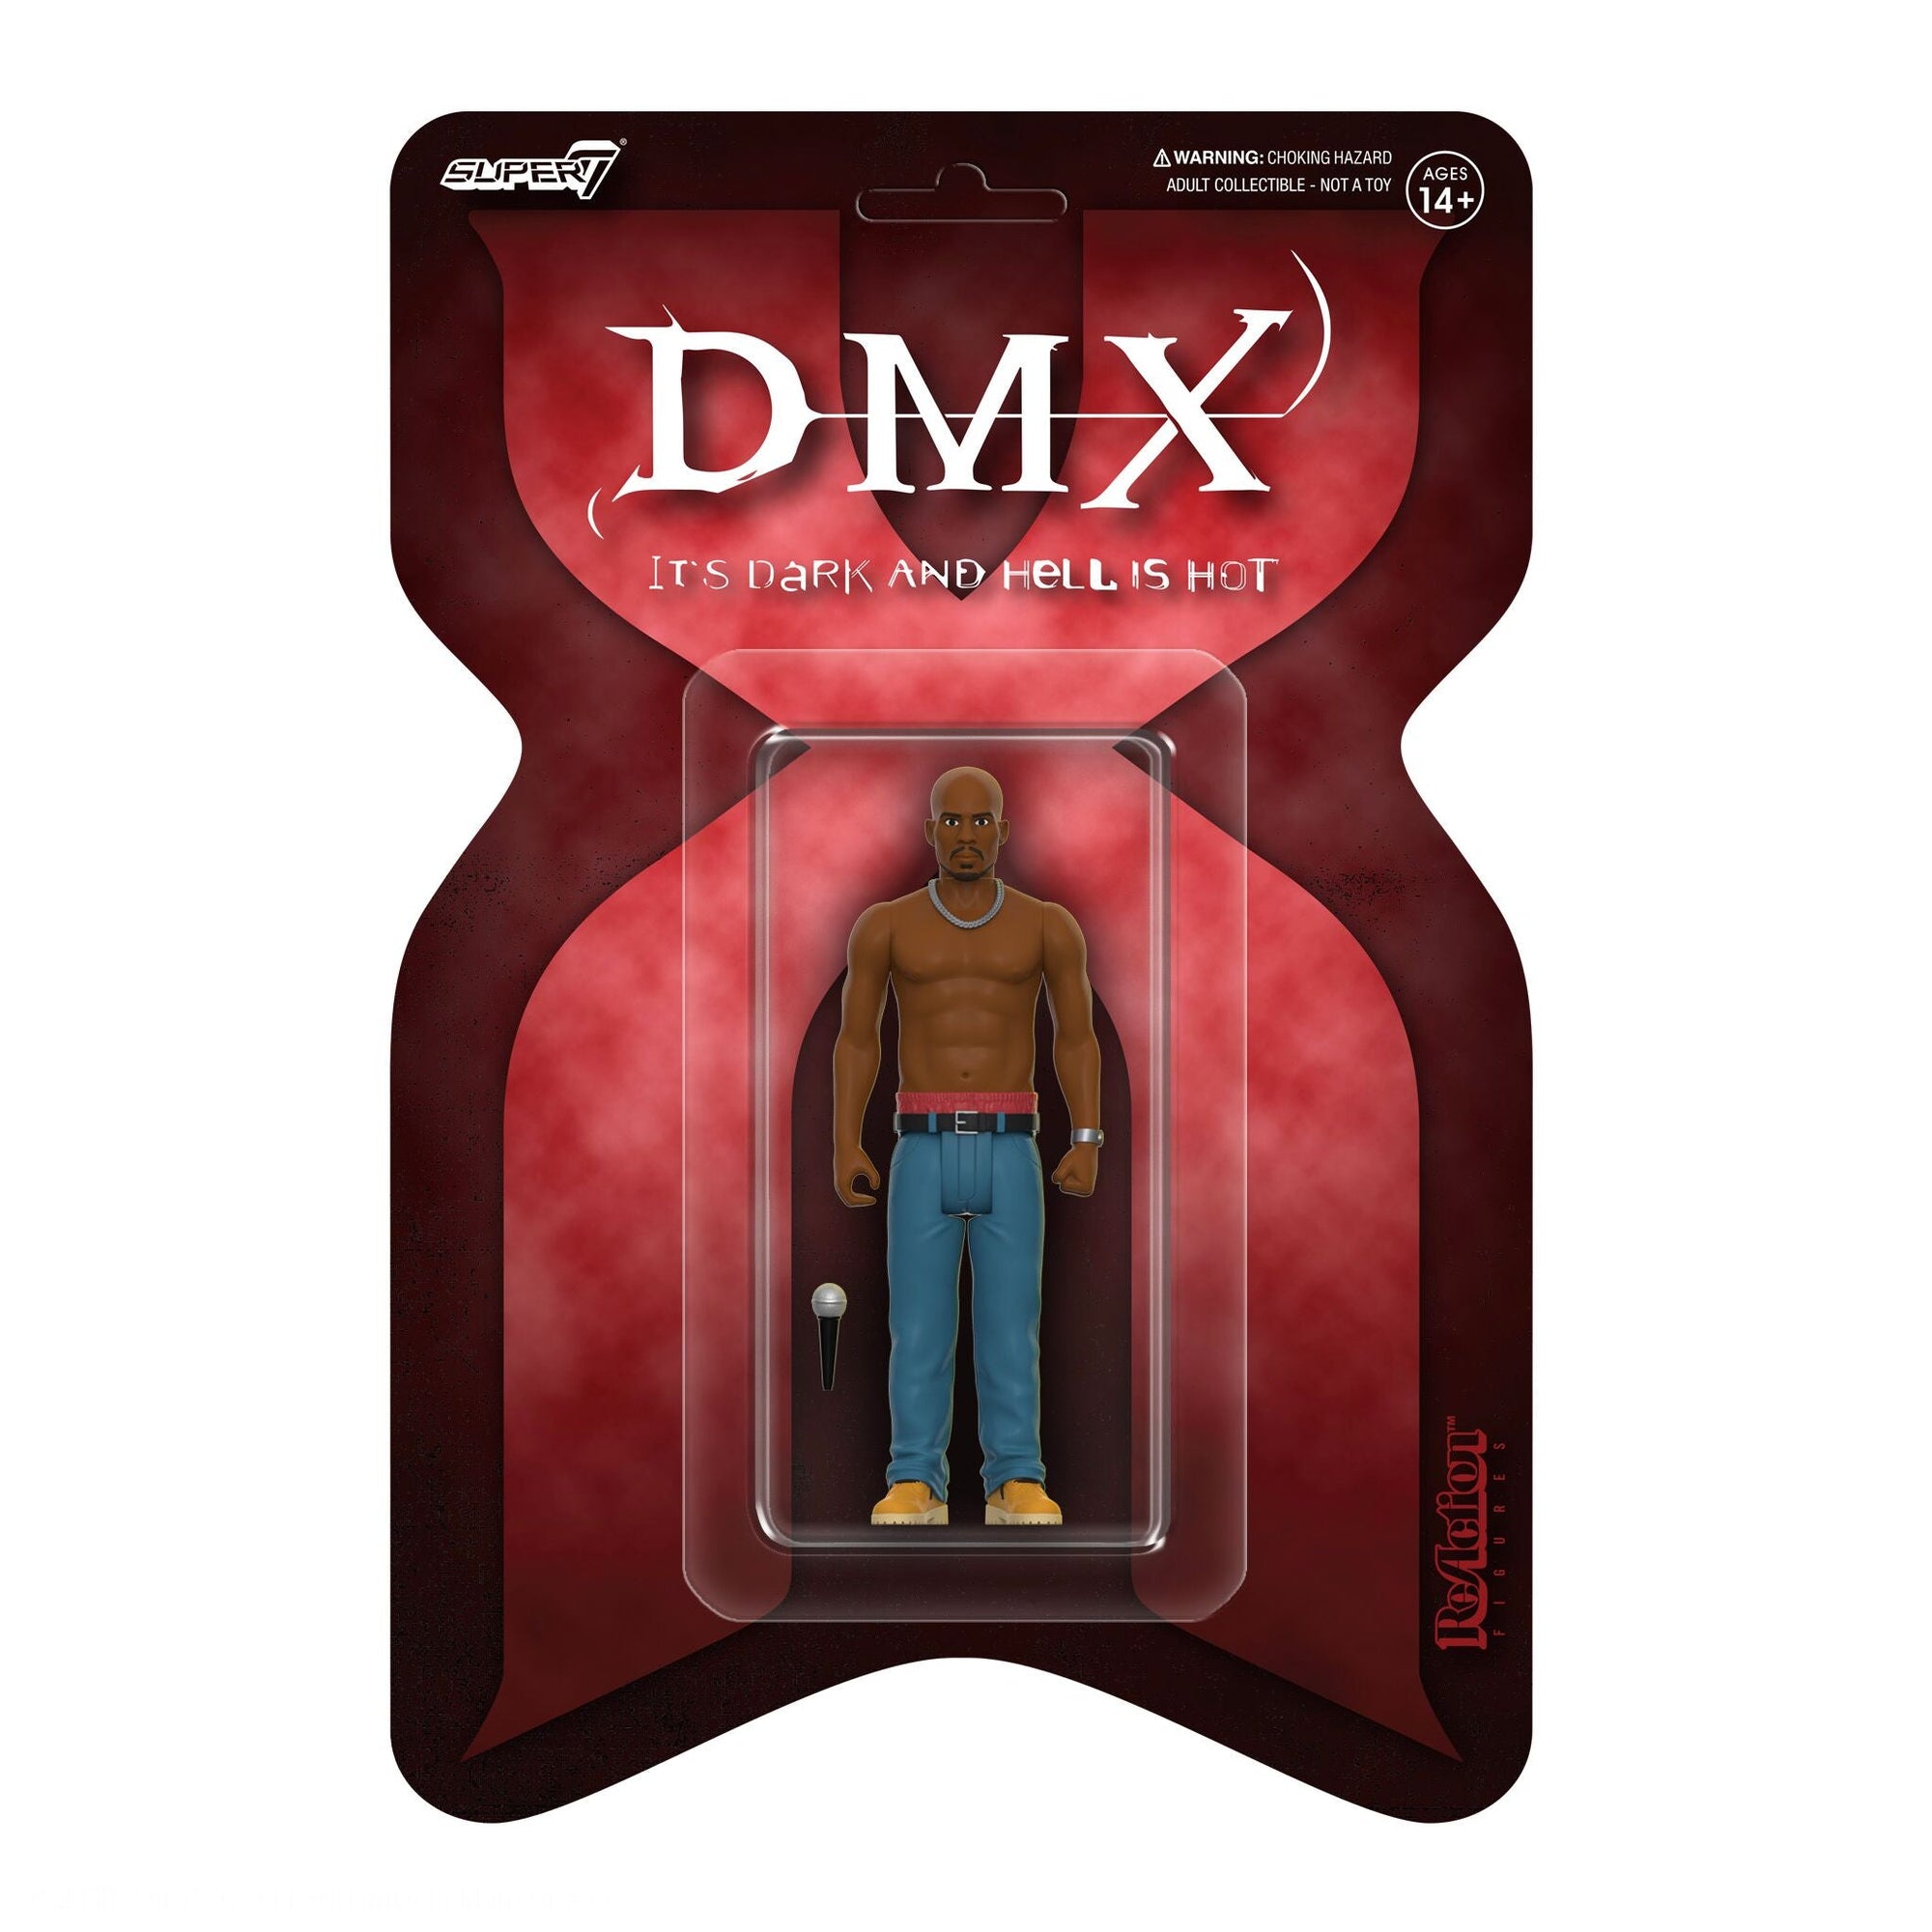 DMX ReAction Figure - DMX (It's Dark And Hell Is Hot) by Super7 *PUNCHED